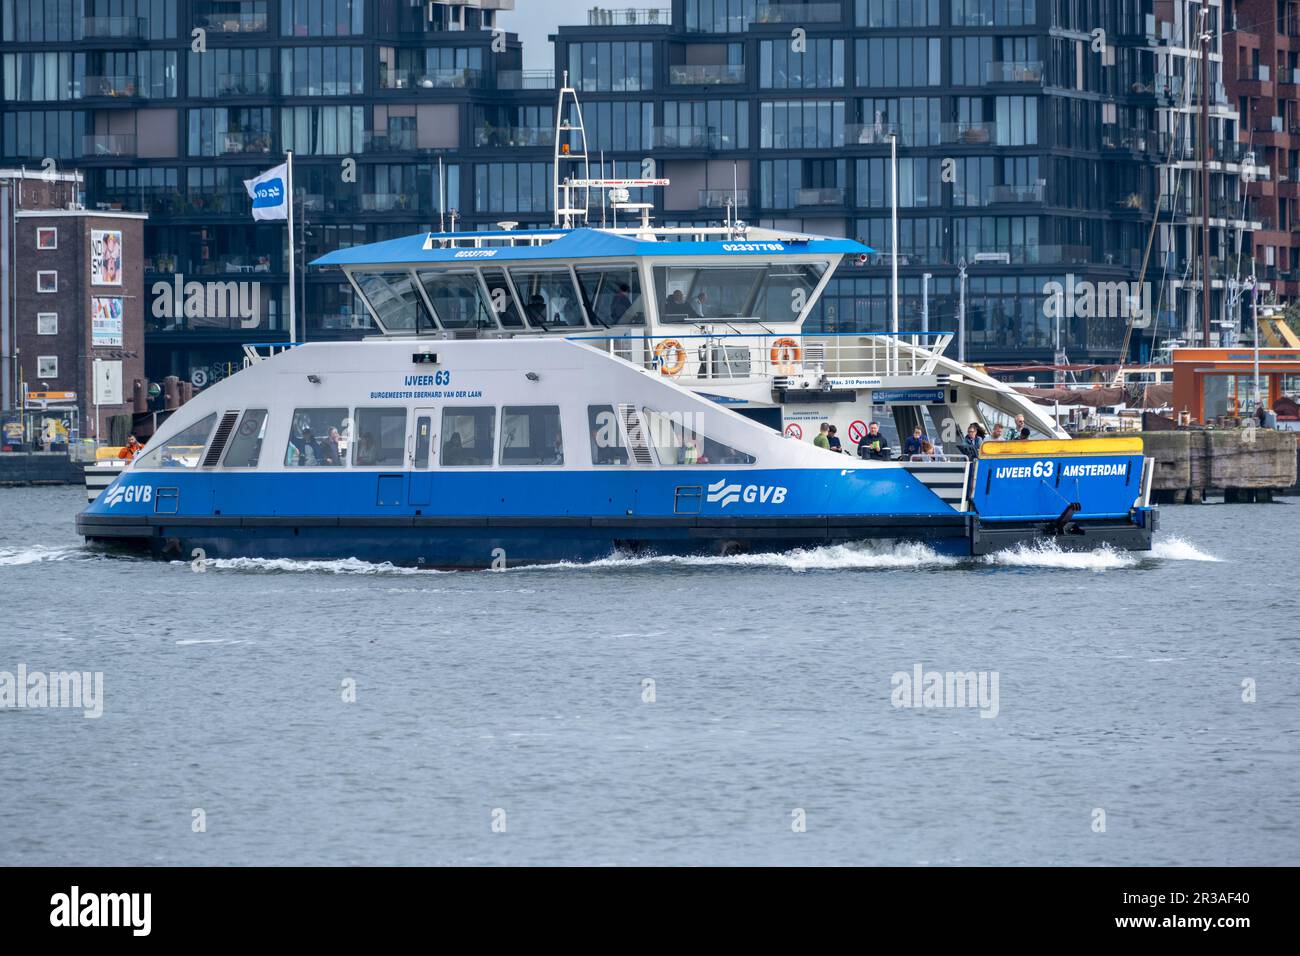 Amsterdam, The Netherlands - 8 September 2022: A GVB ferryboat crossing the IJ River Stock Photo